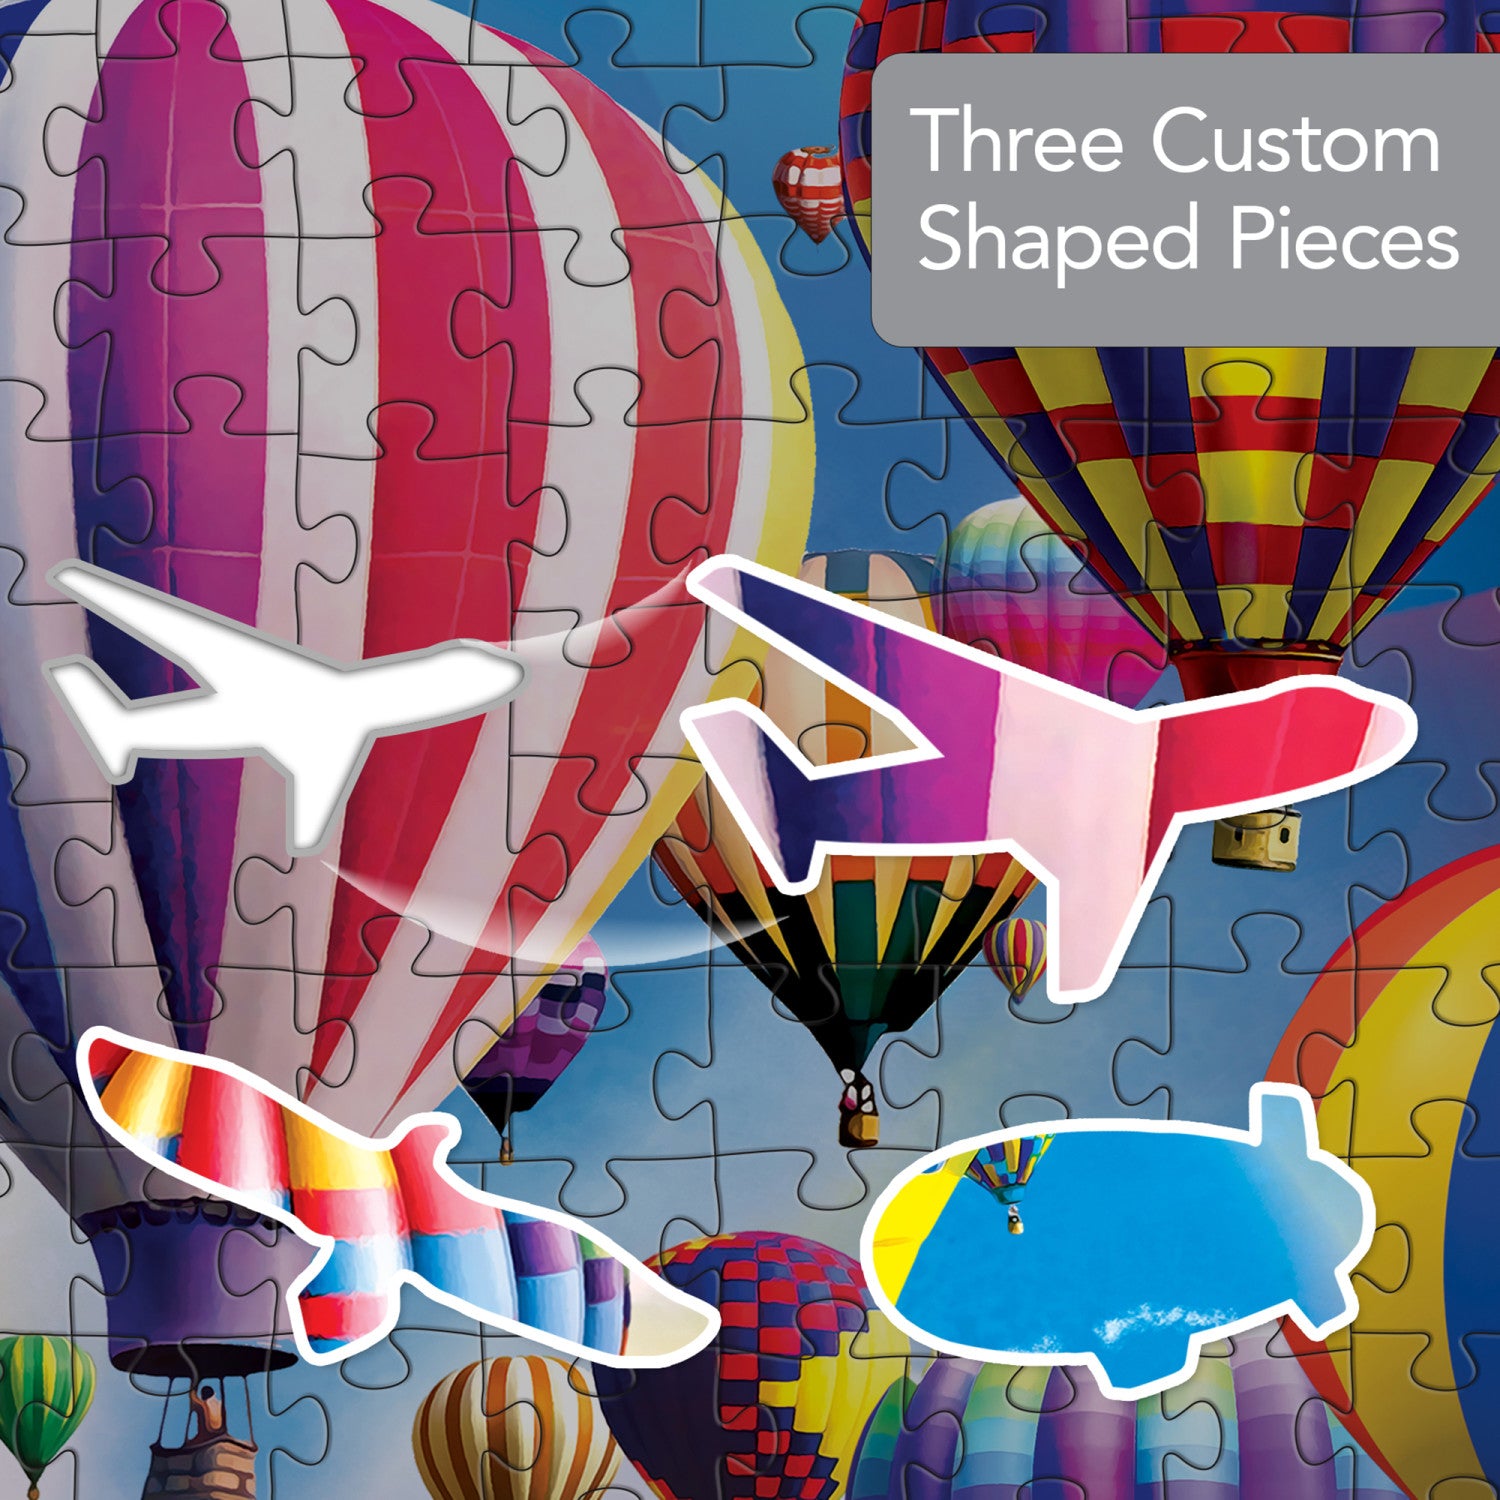 Shapes - Hot Air Balloons 500 Piece Jigsaw Puzzle